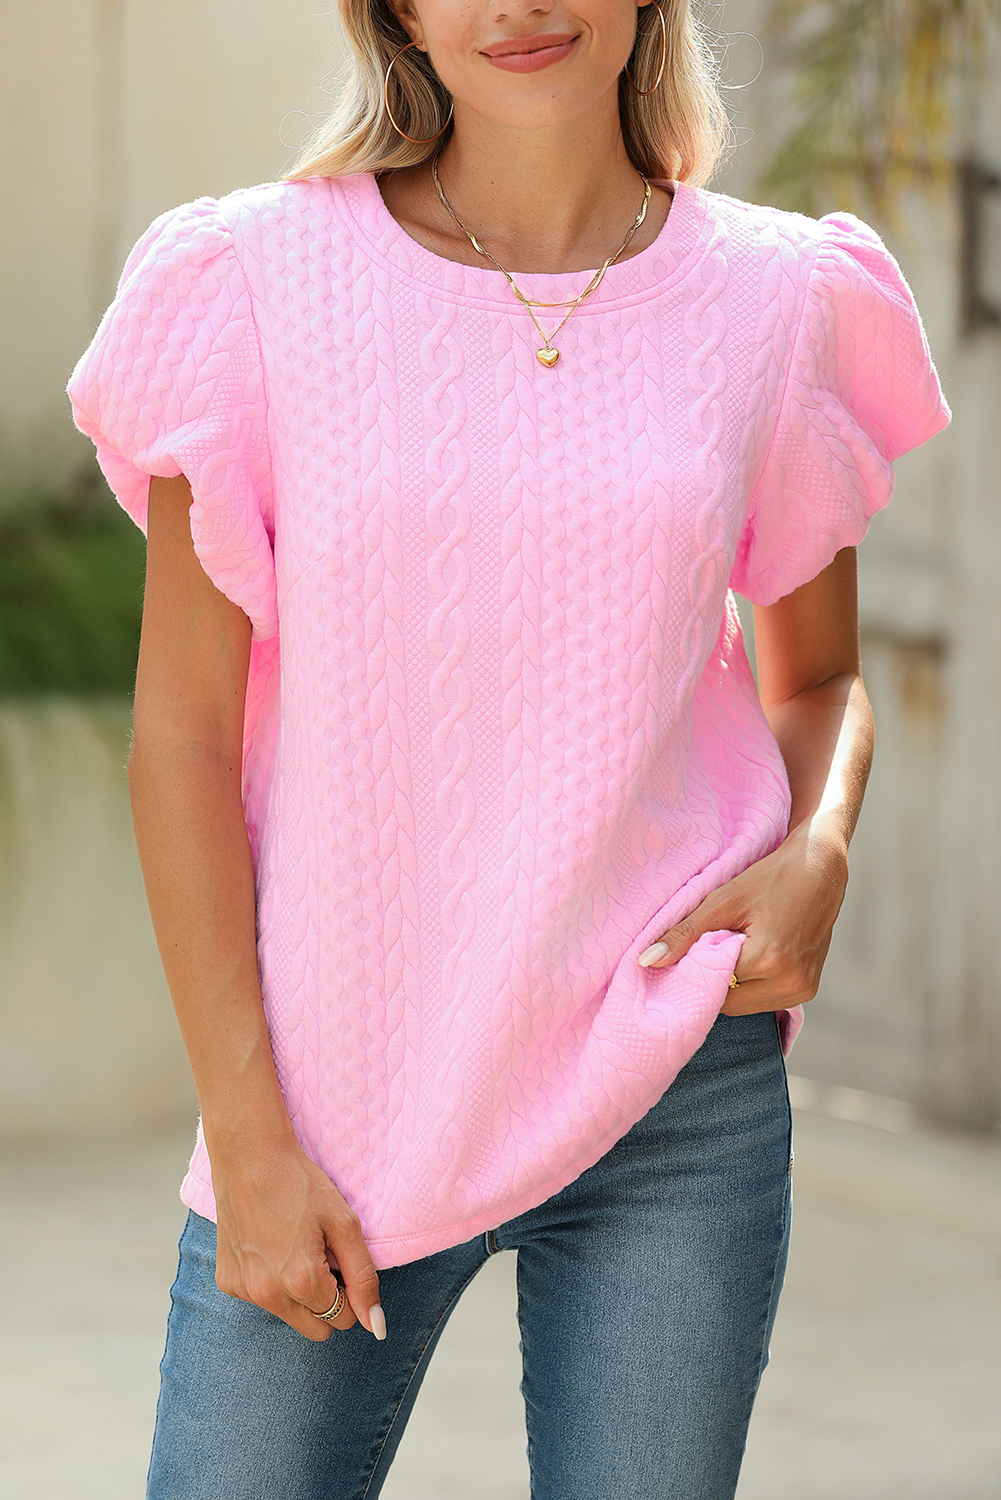 Shewin Wholesale Clothing Pink Textured Puff Sleeve Round Neck T-SHIRT